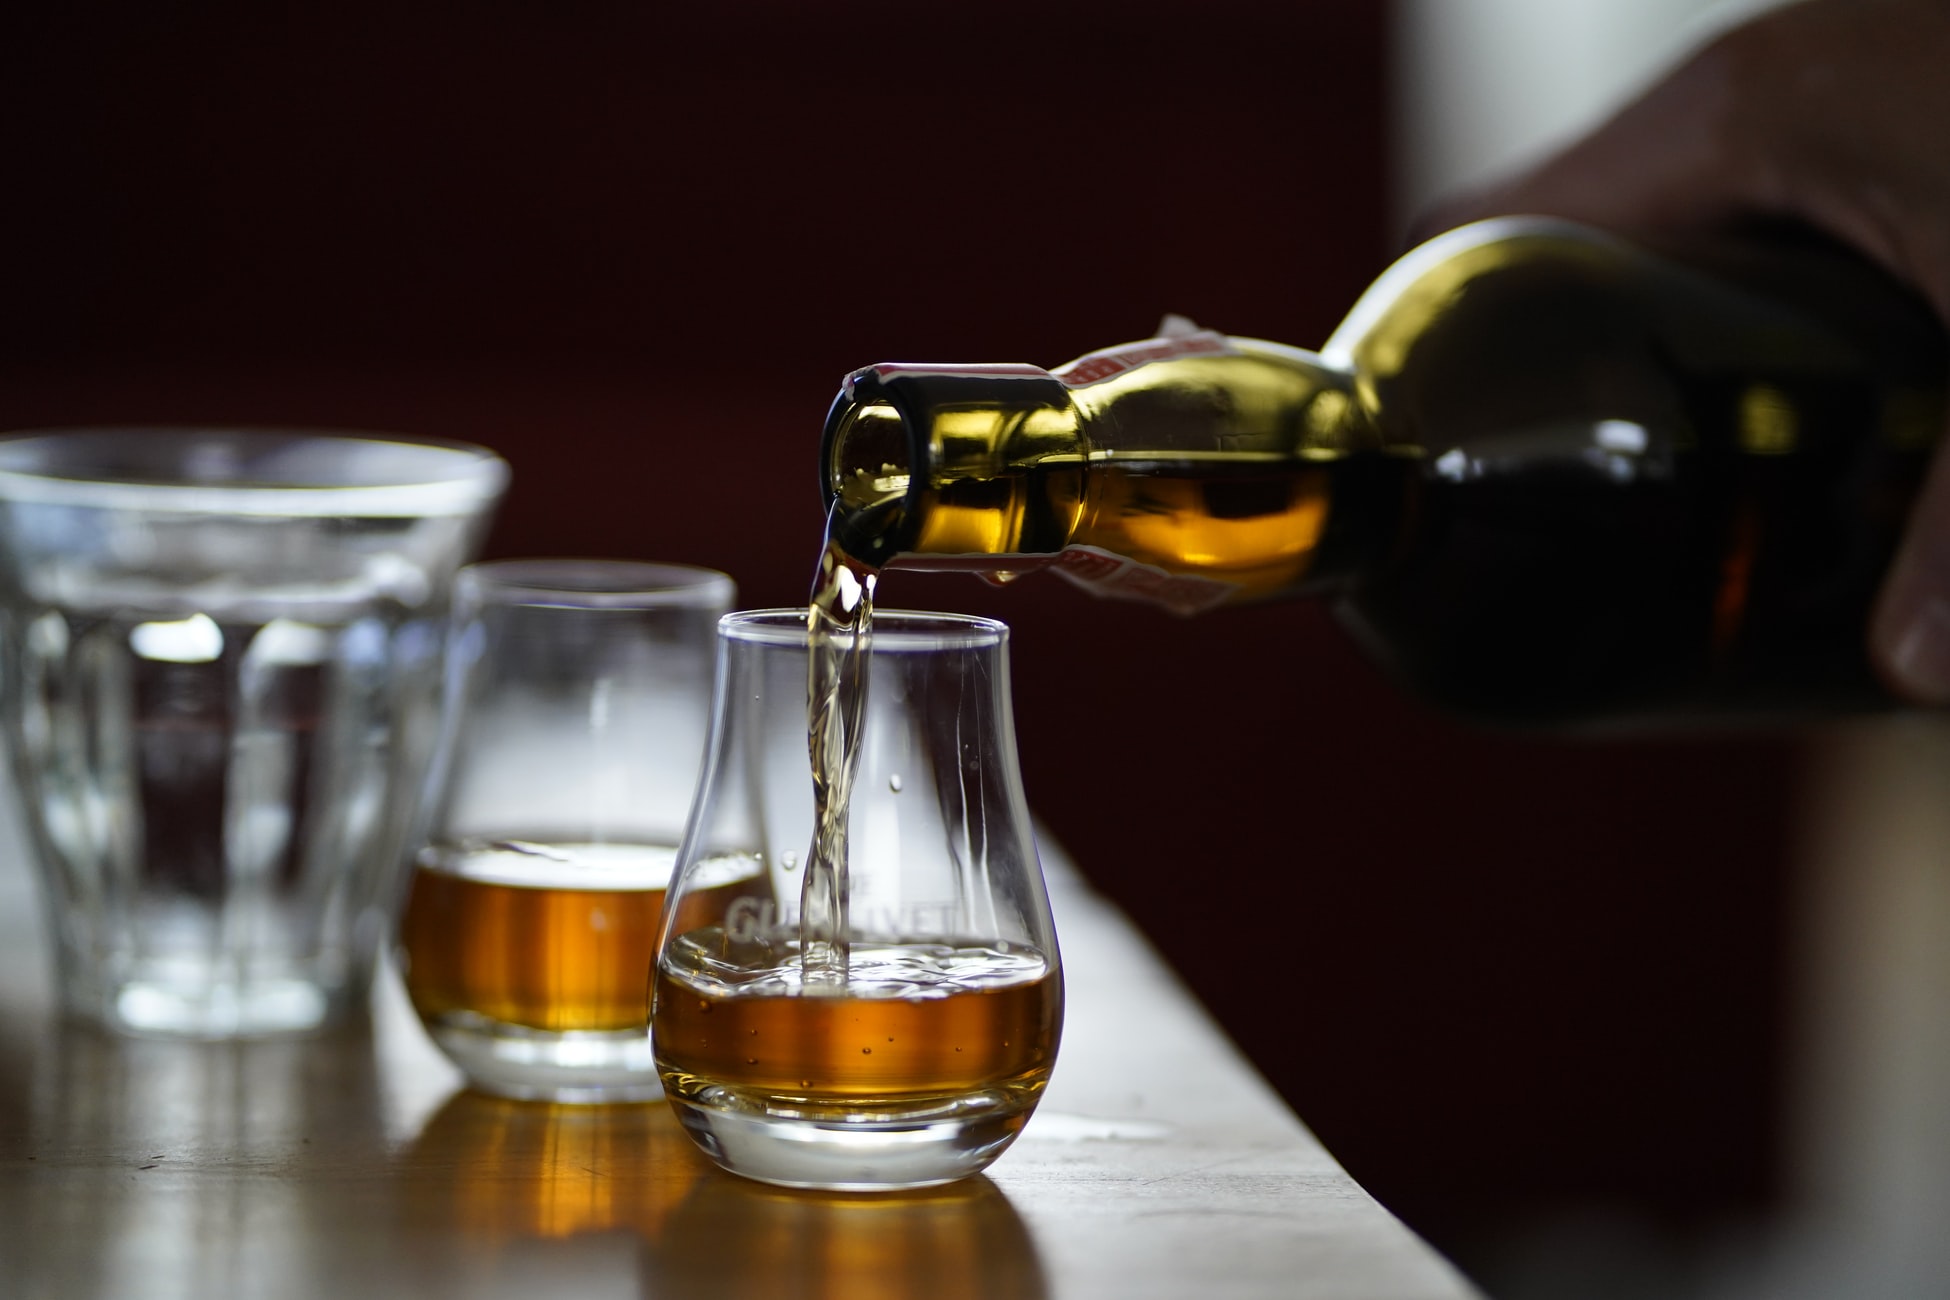 The Scotch Whisky Briefing for 2014